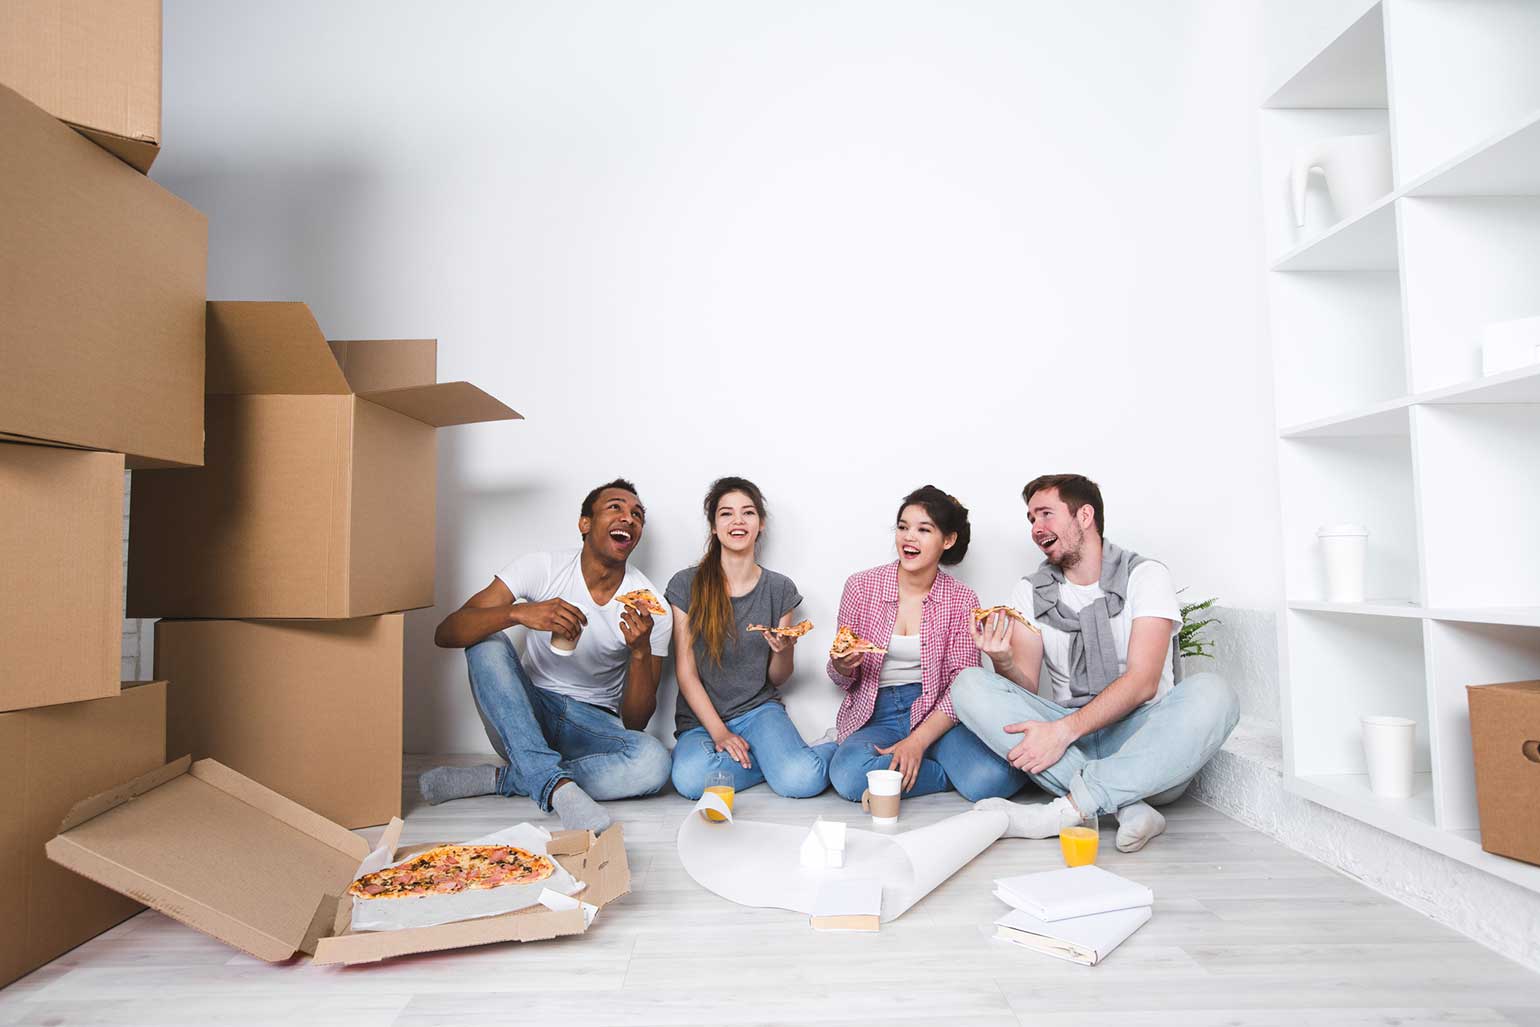 Happy first time home buyers and their 2 friends eating pizza on the floor after unpacking moving boxes.